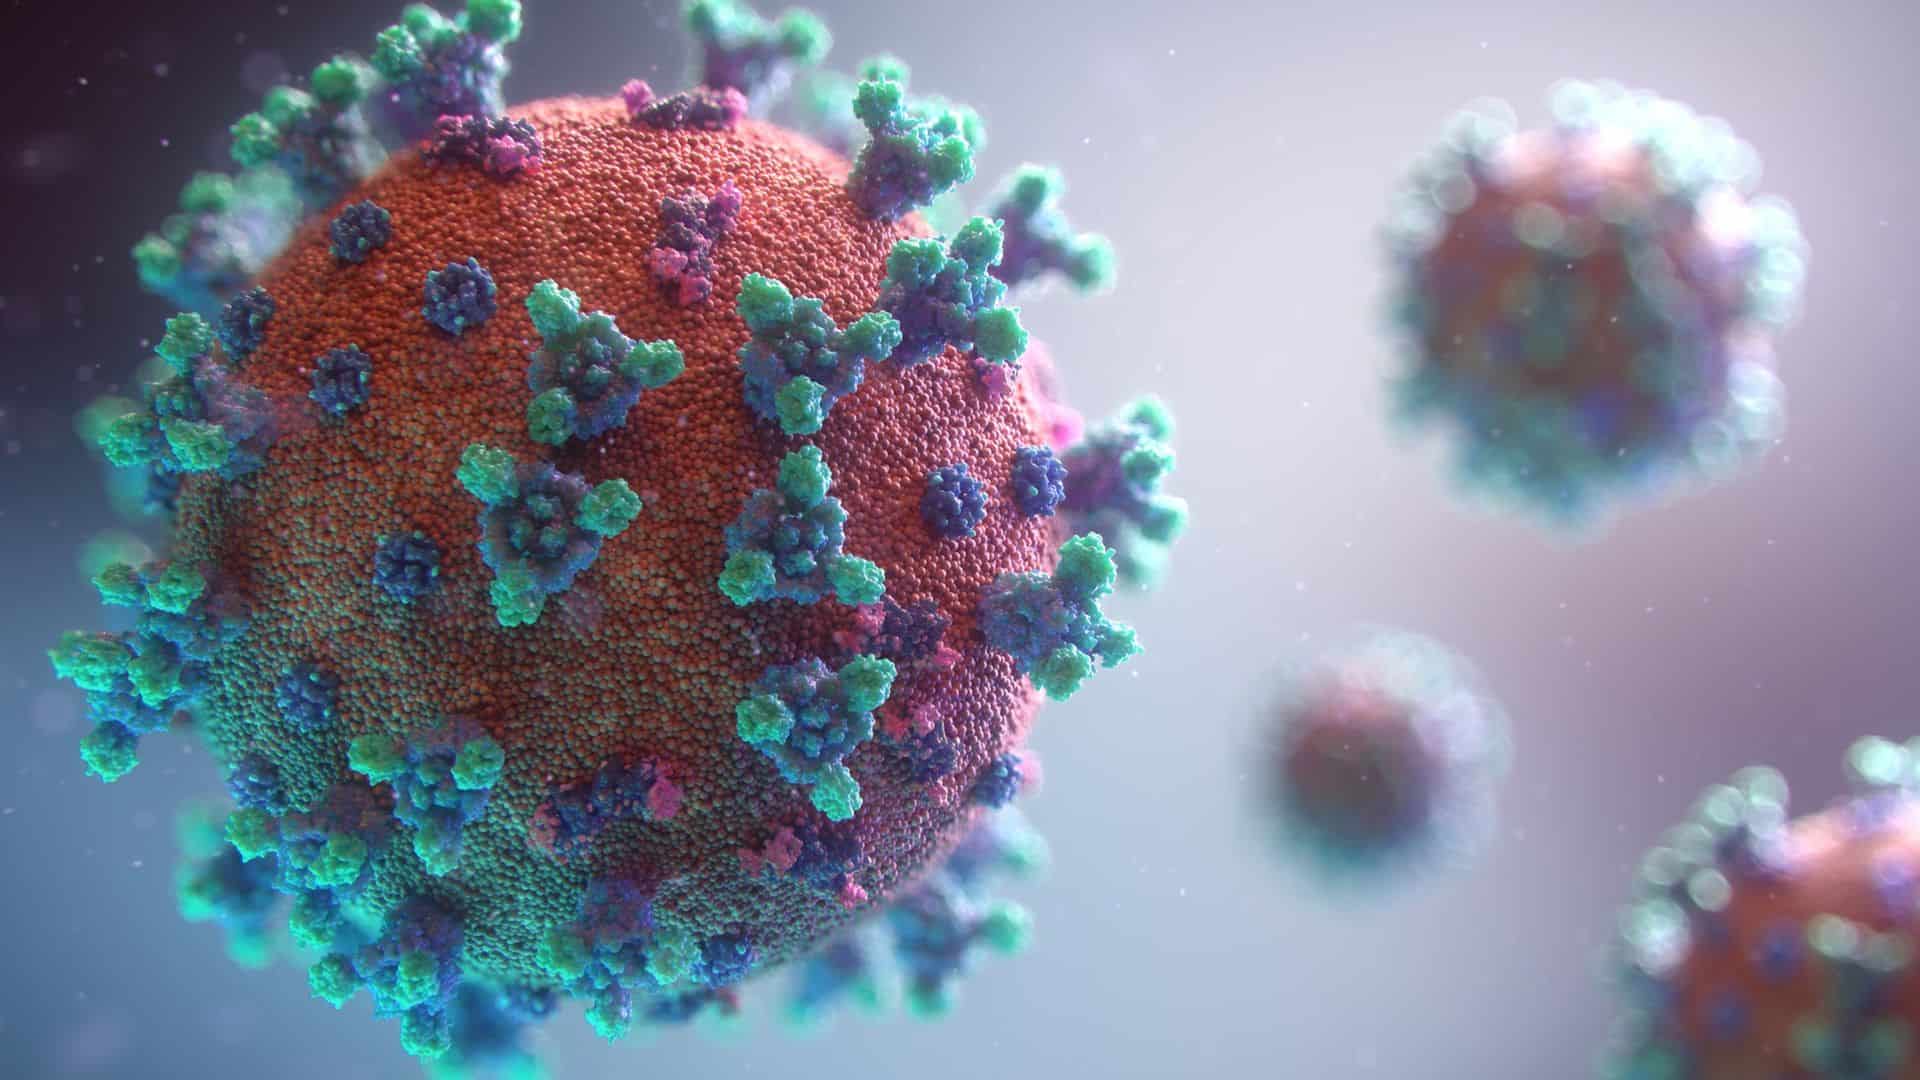 New visualisation of the Covid-19 virus, March 12, 2020